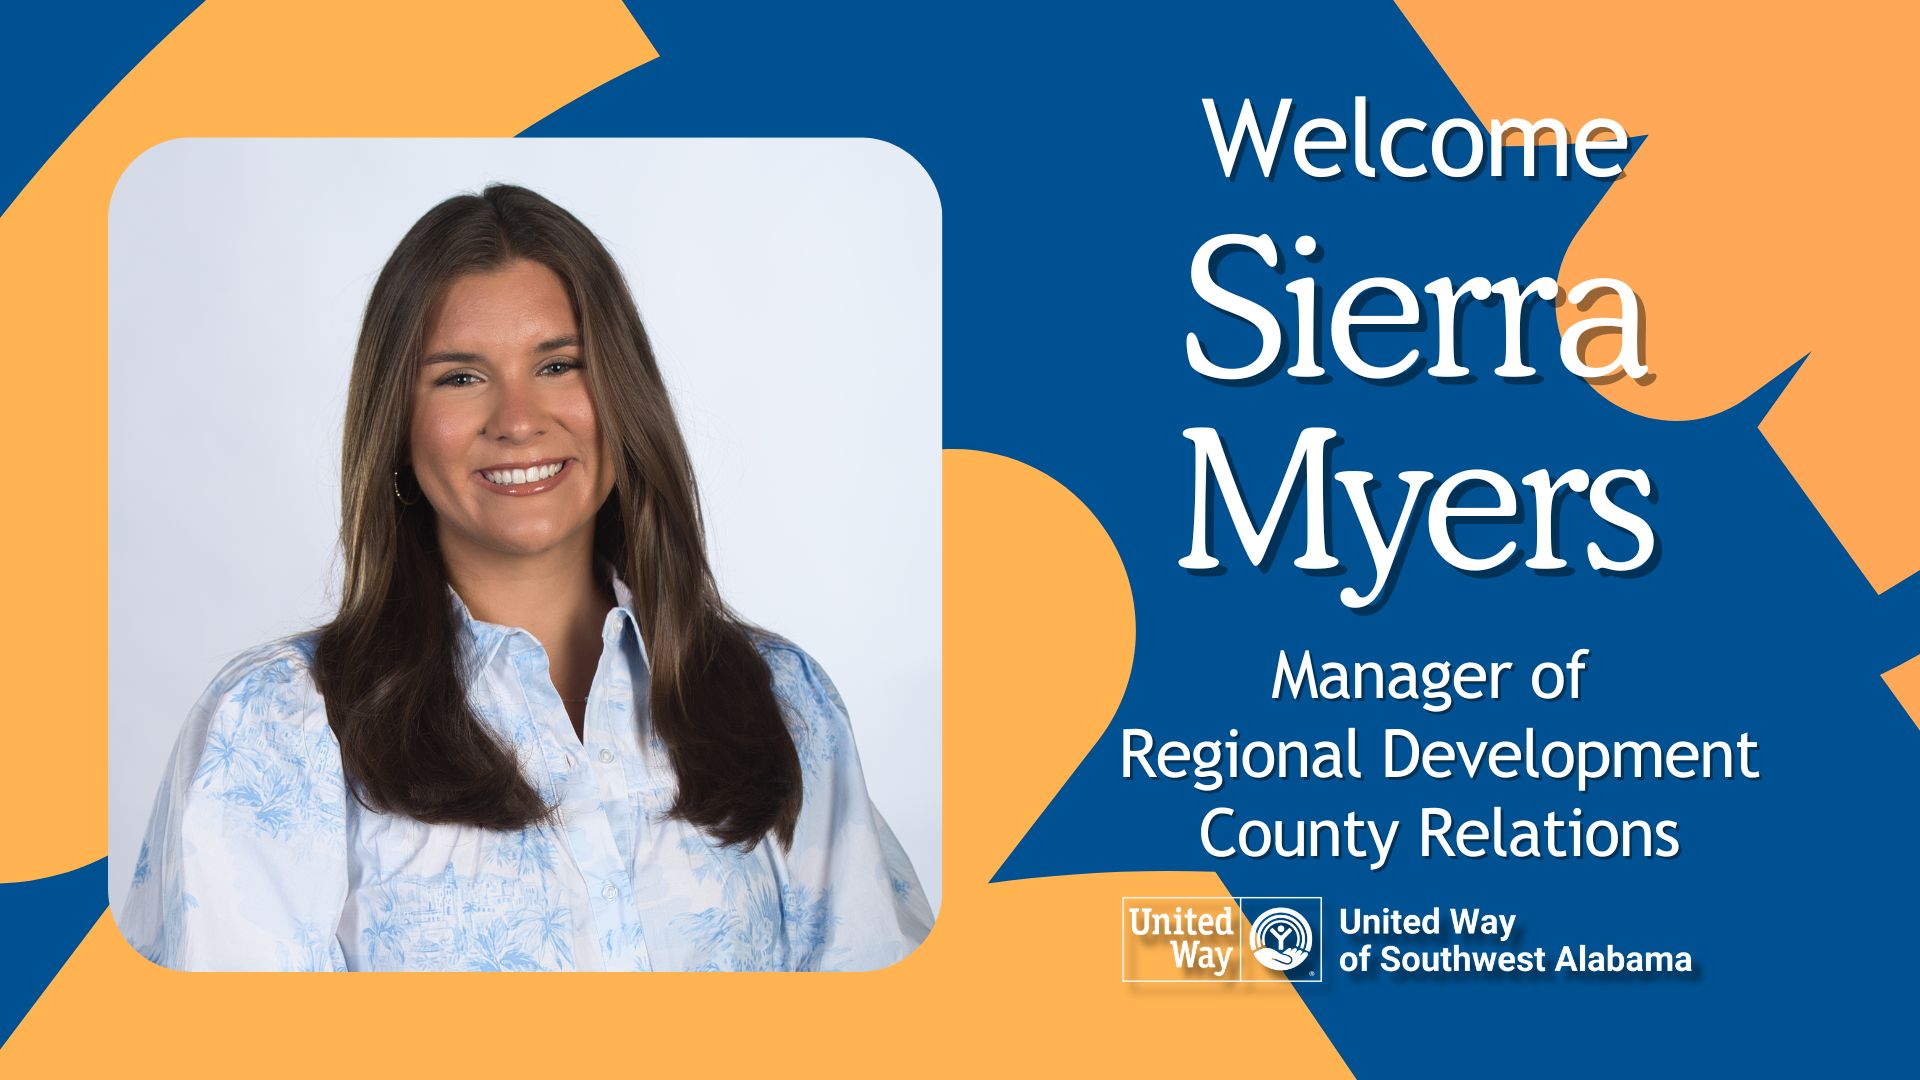 Welcome Sierra Myers, Manager of Regional Development - County Relations